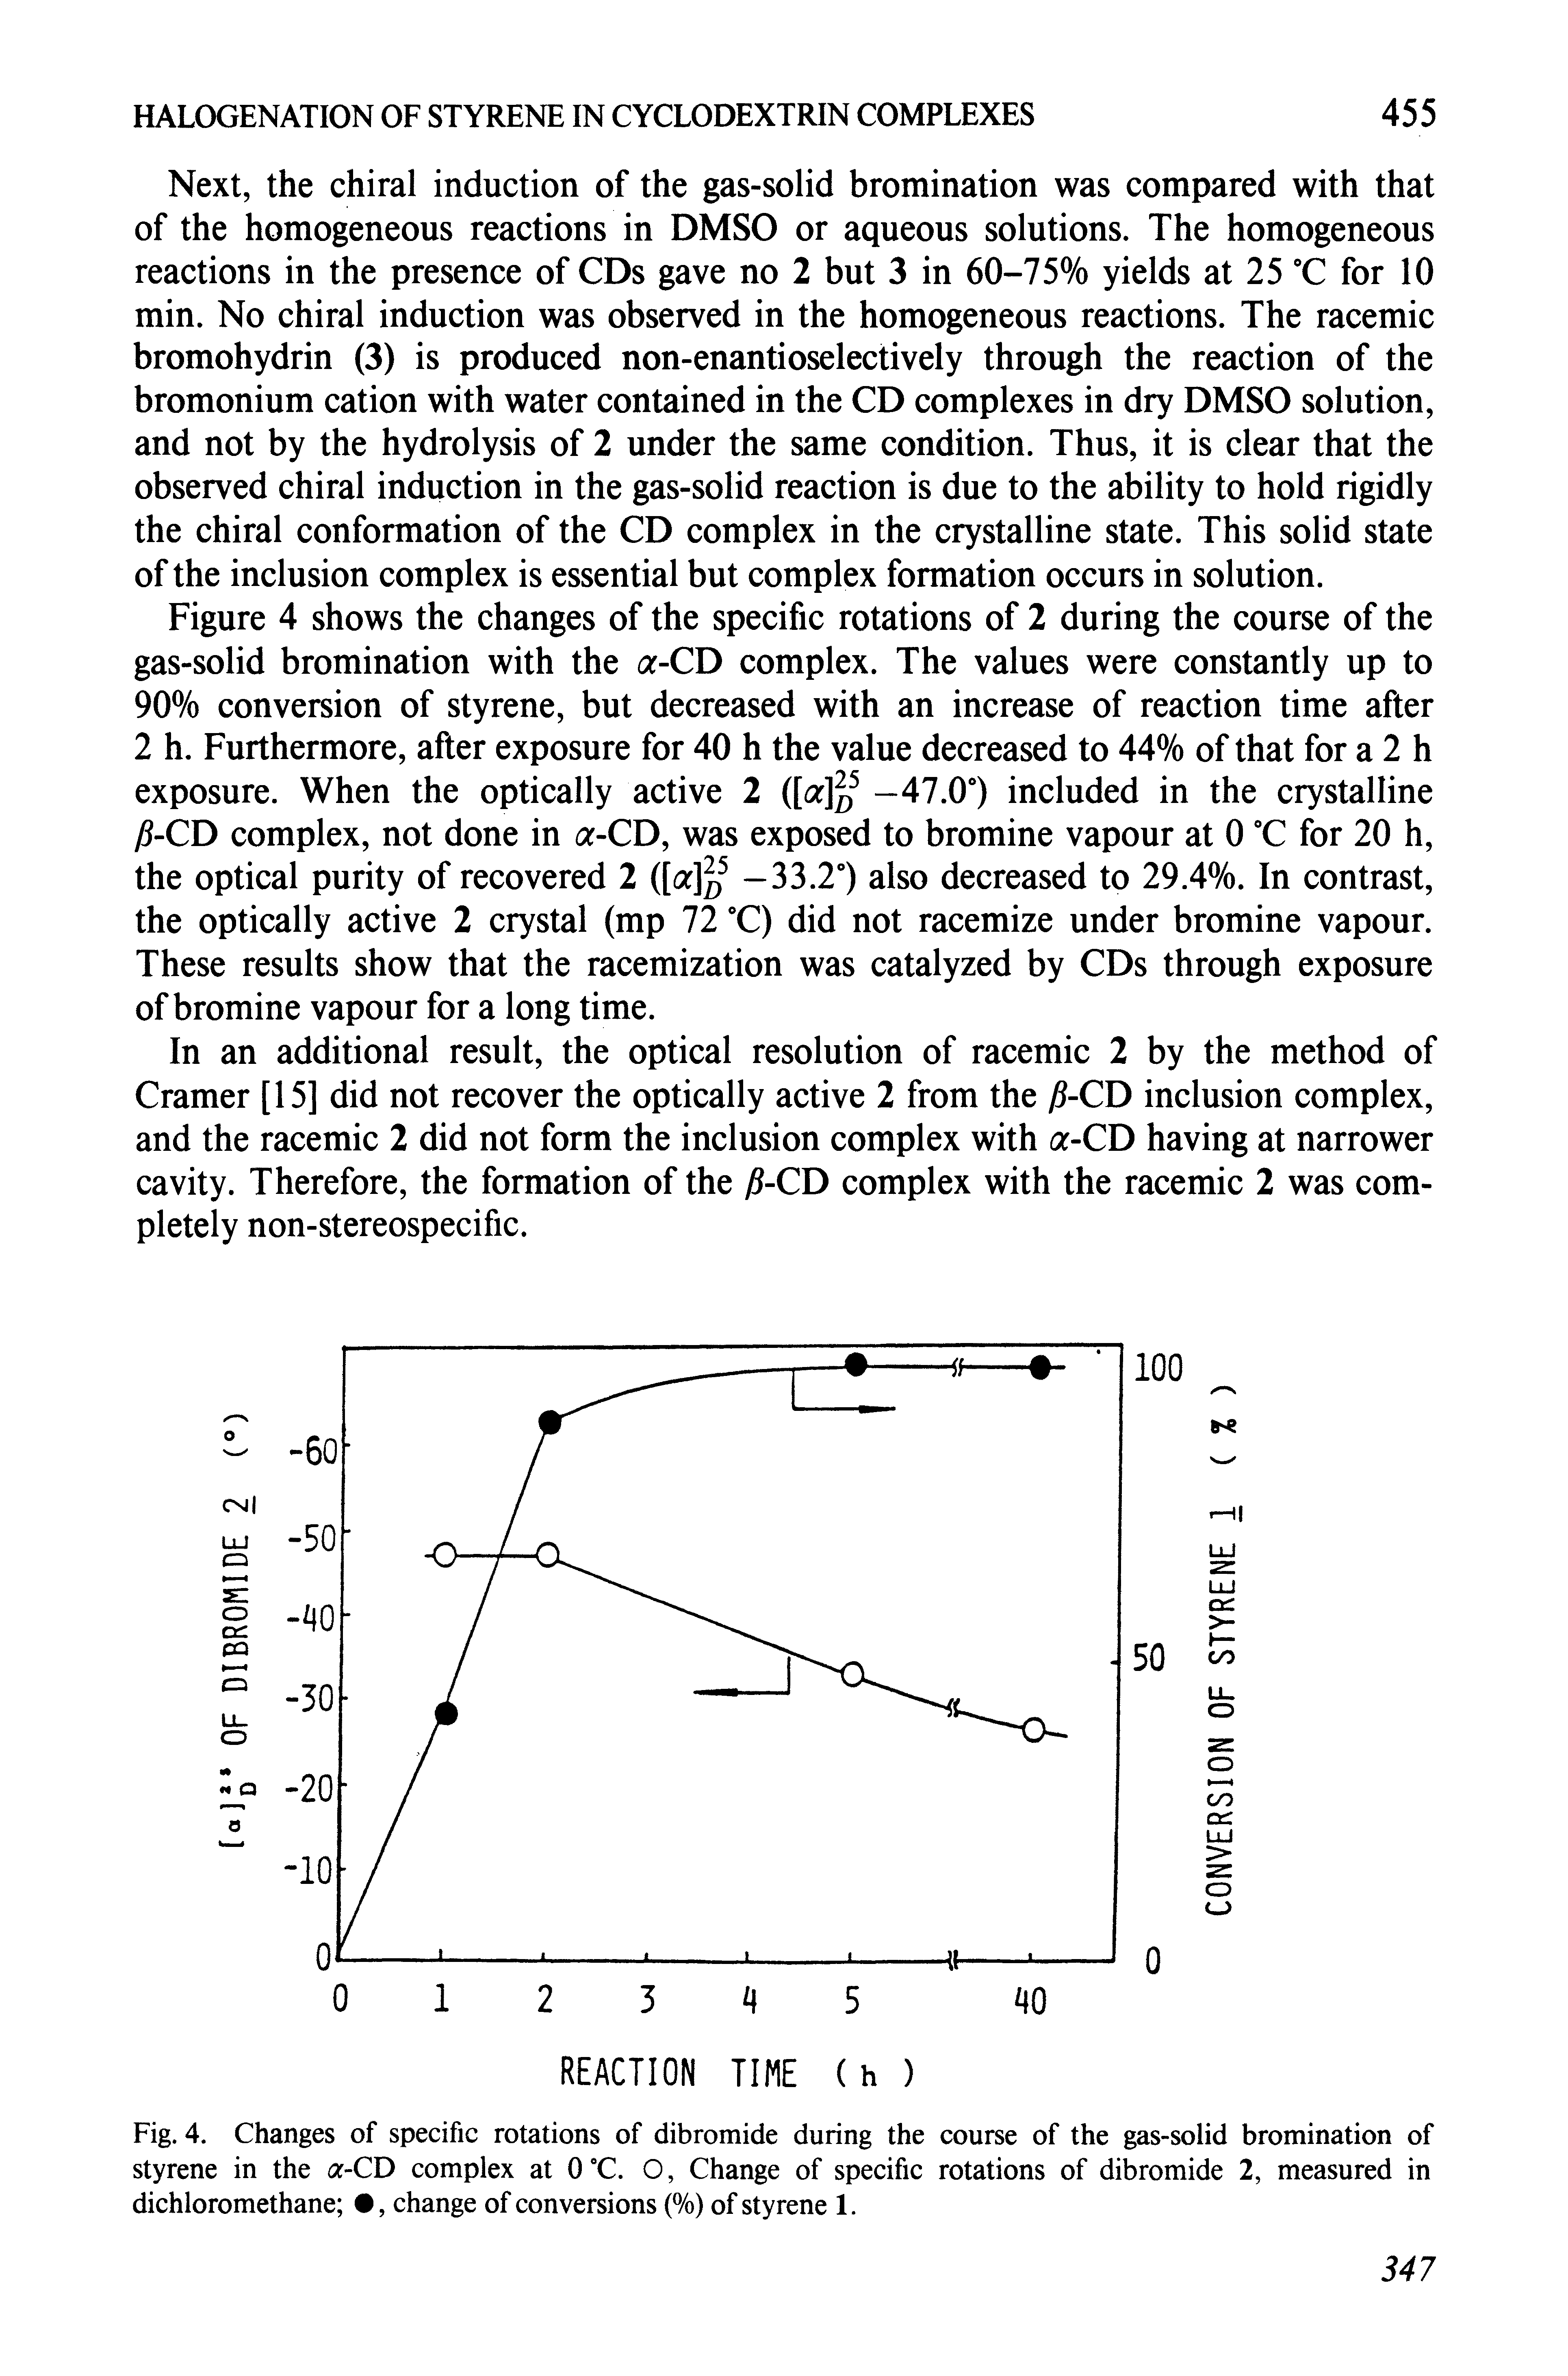 Fig. 4. Changes of specific rotations of dibromide during the course of the gas-solid bromination of styrene in the a-CD complex at 0°C. O, Change of specific rotations of dibromide 2, measured in dichloromethane , change of conversions (%) of styrene 1.